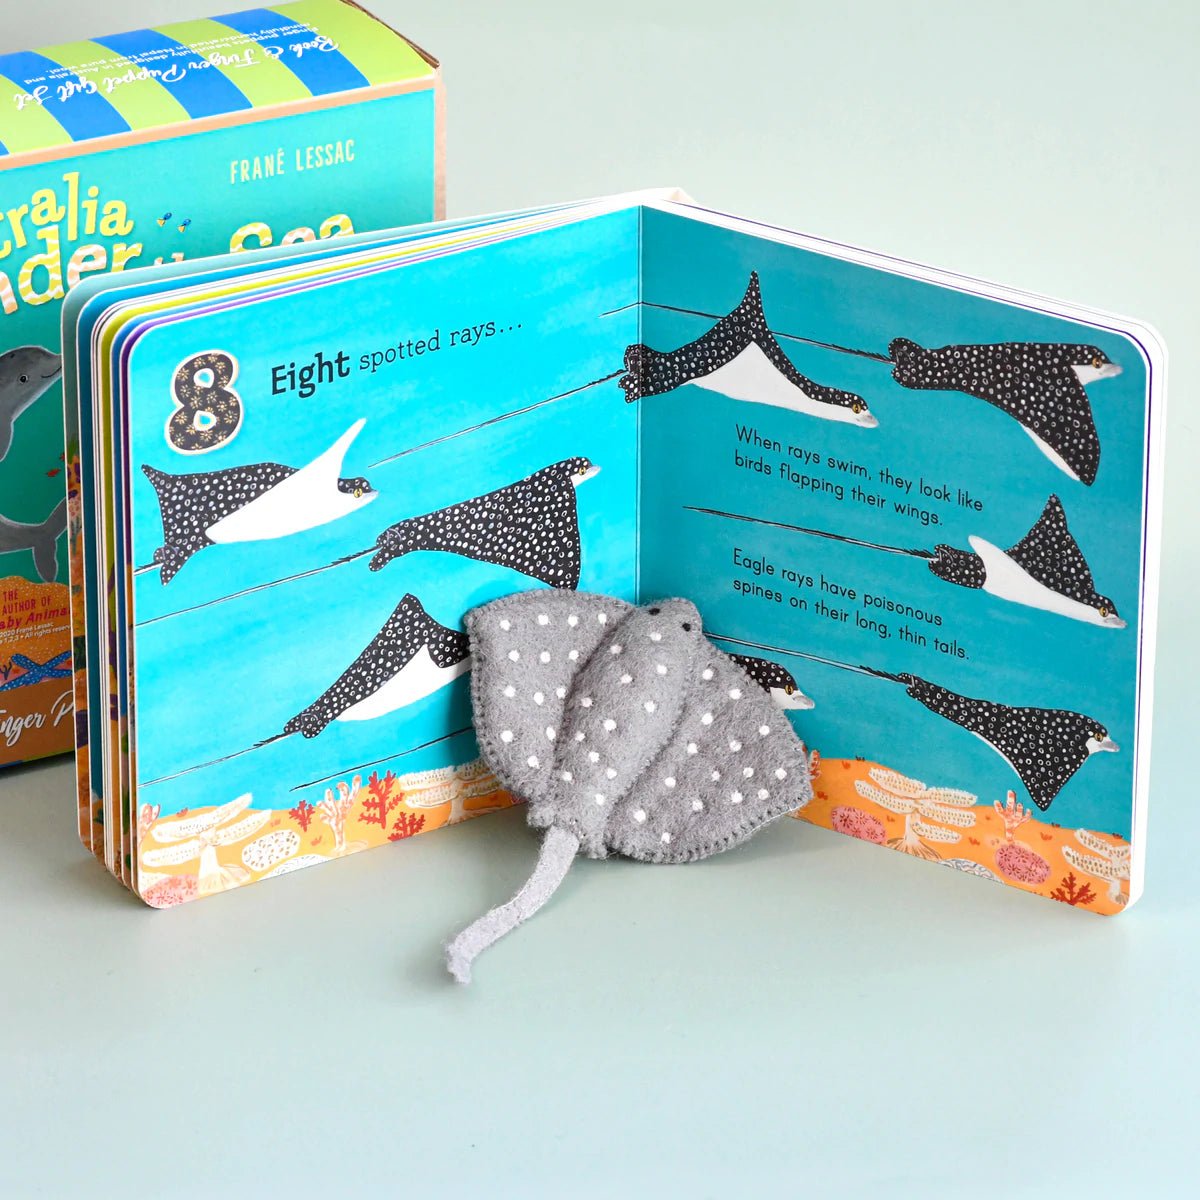 AUSTRALIAN UNDER THE SEA 1, 2, 3 BY FRANÉ LESSAC - BOOK & FINGER PUPPET SET by TARA TREASURES - The Playful Collective